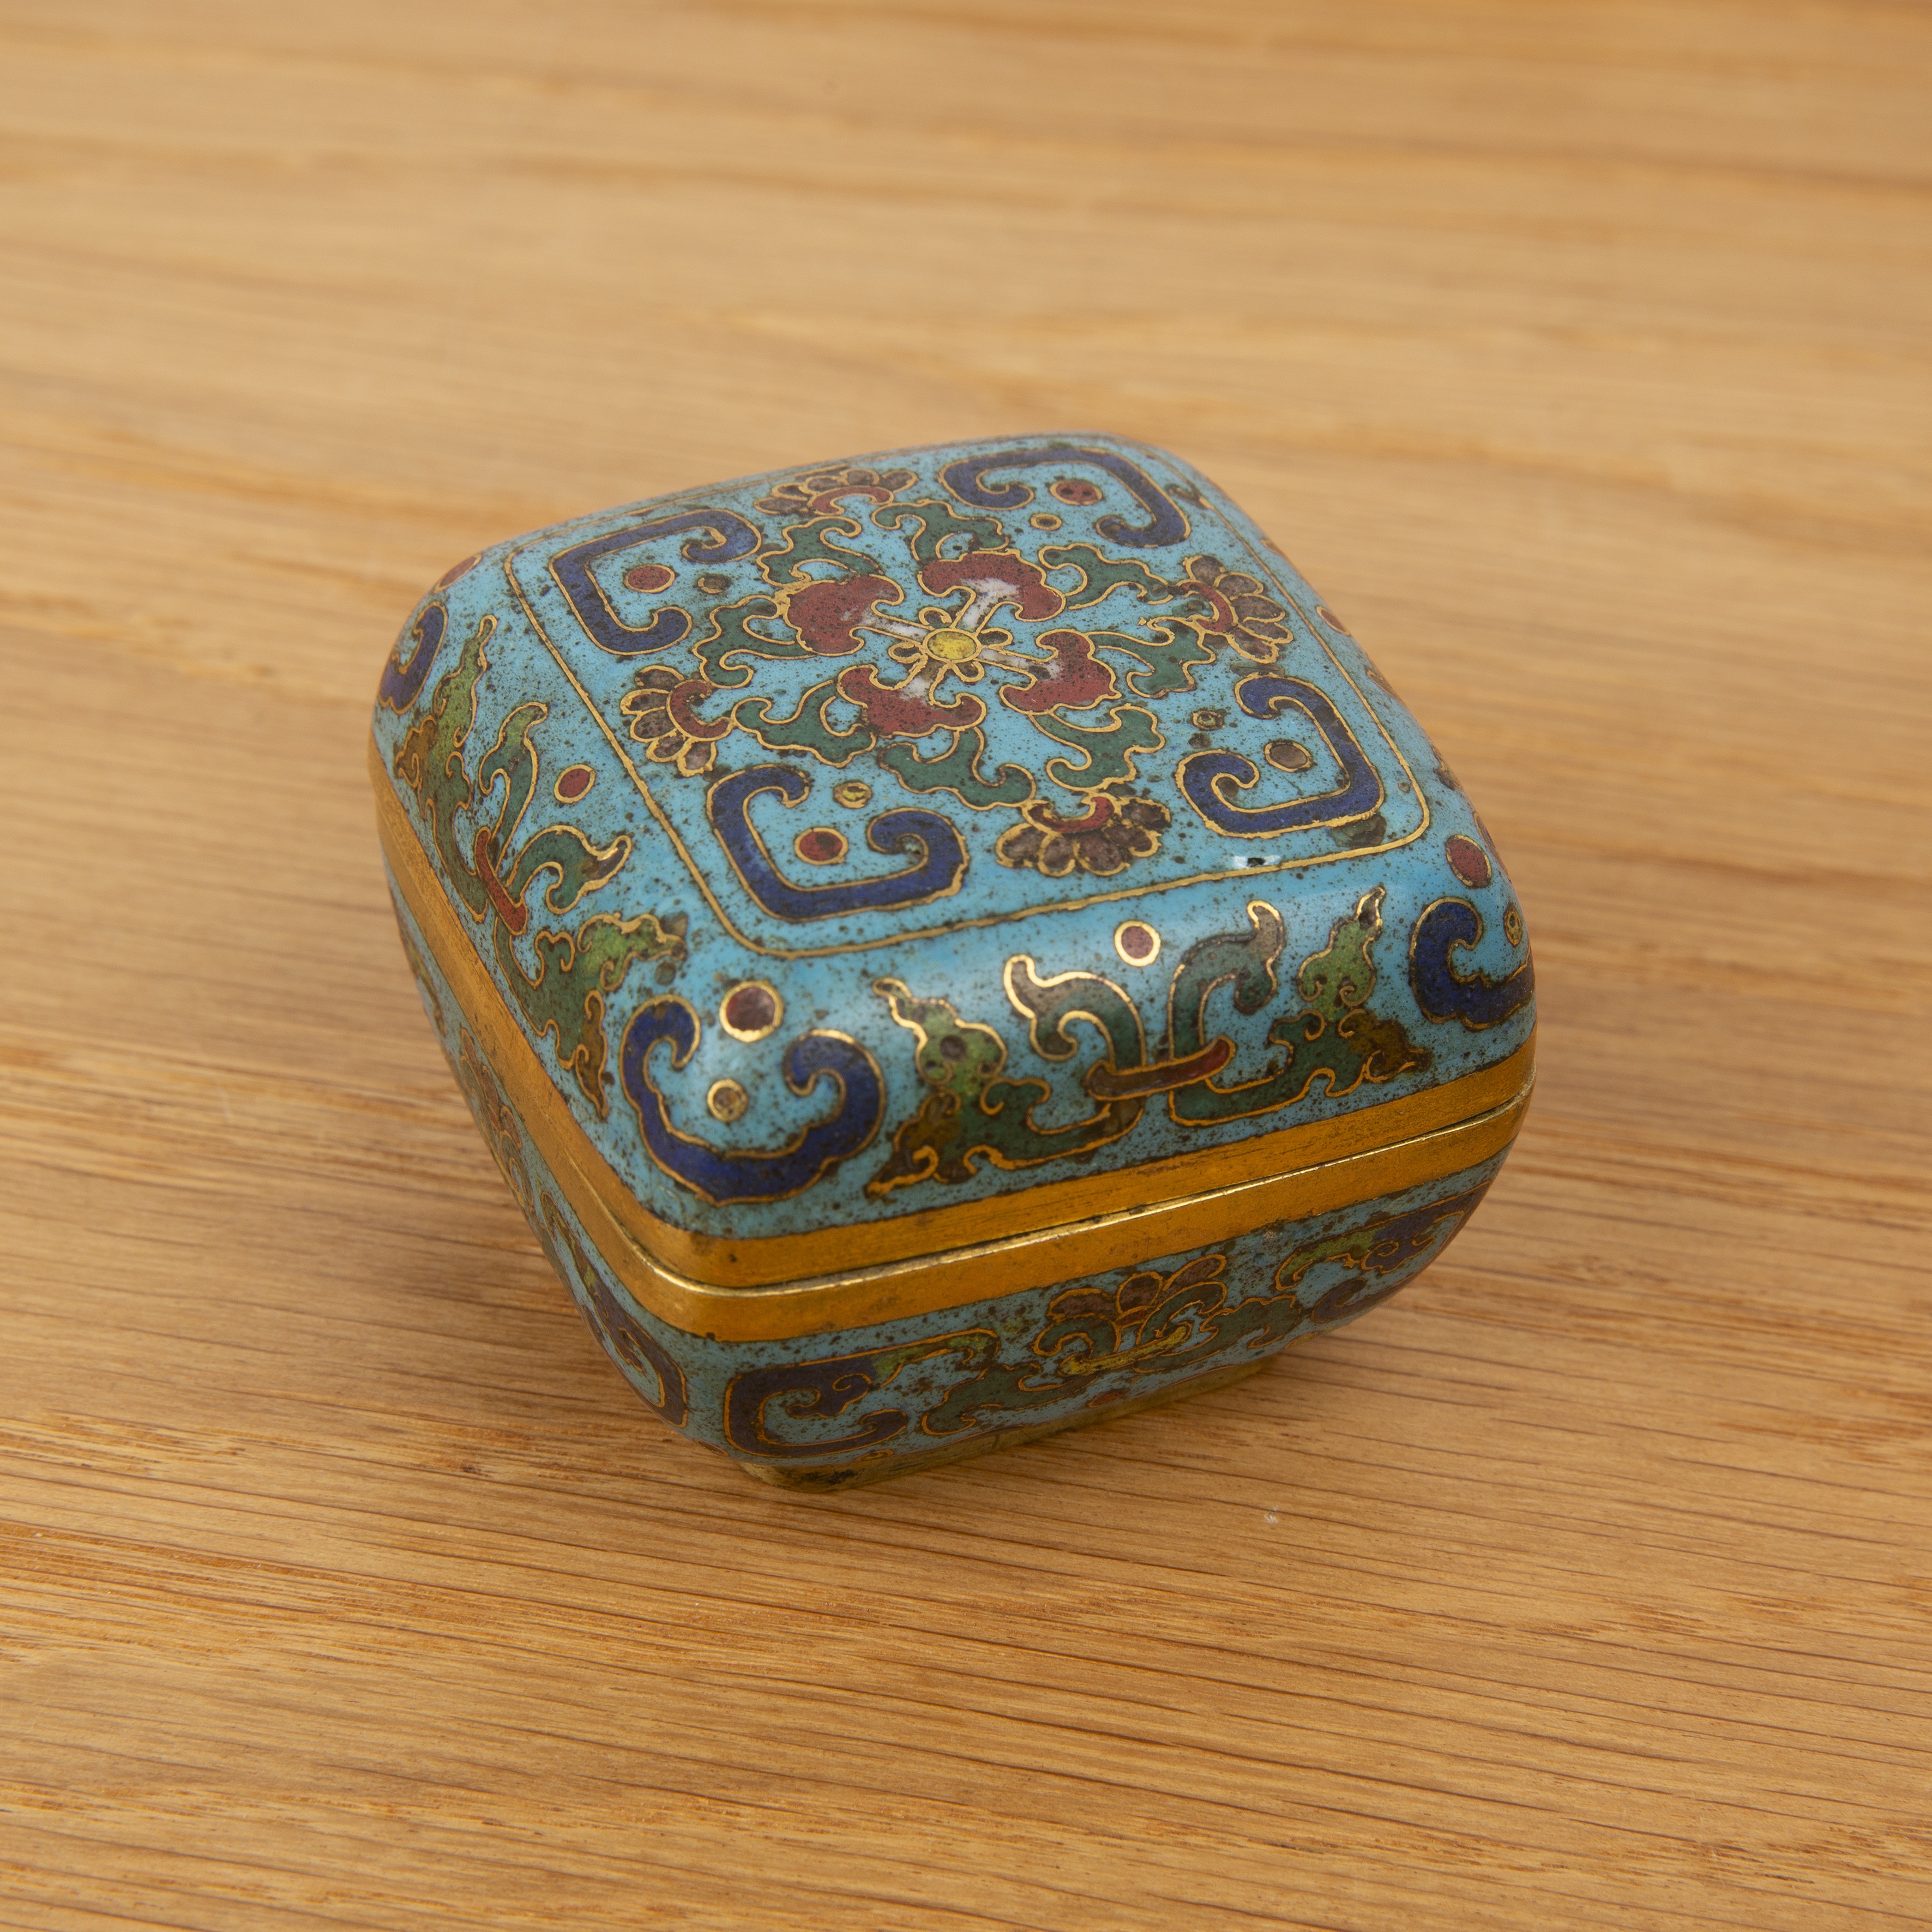 Cloisonné enamel small box Chinese, Qianlong square shaped square box with rounded sides, the